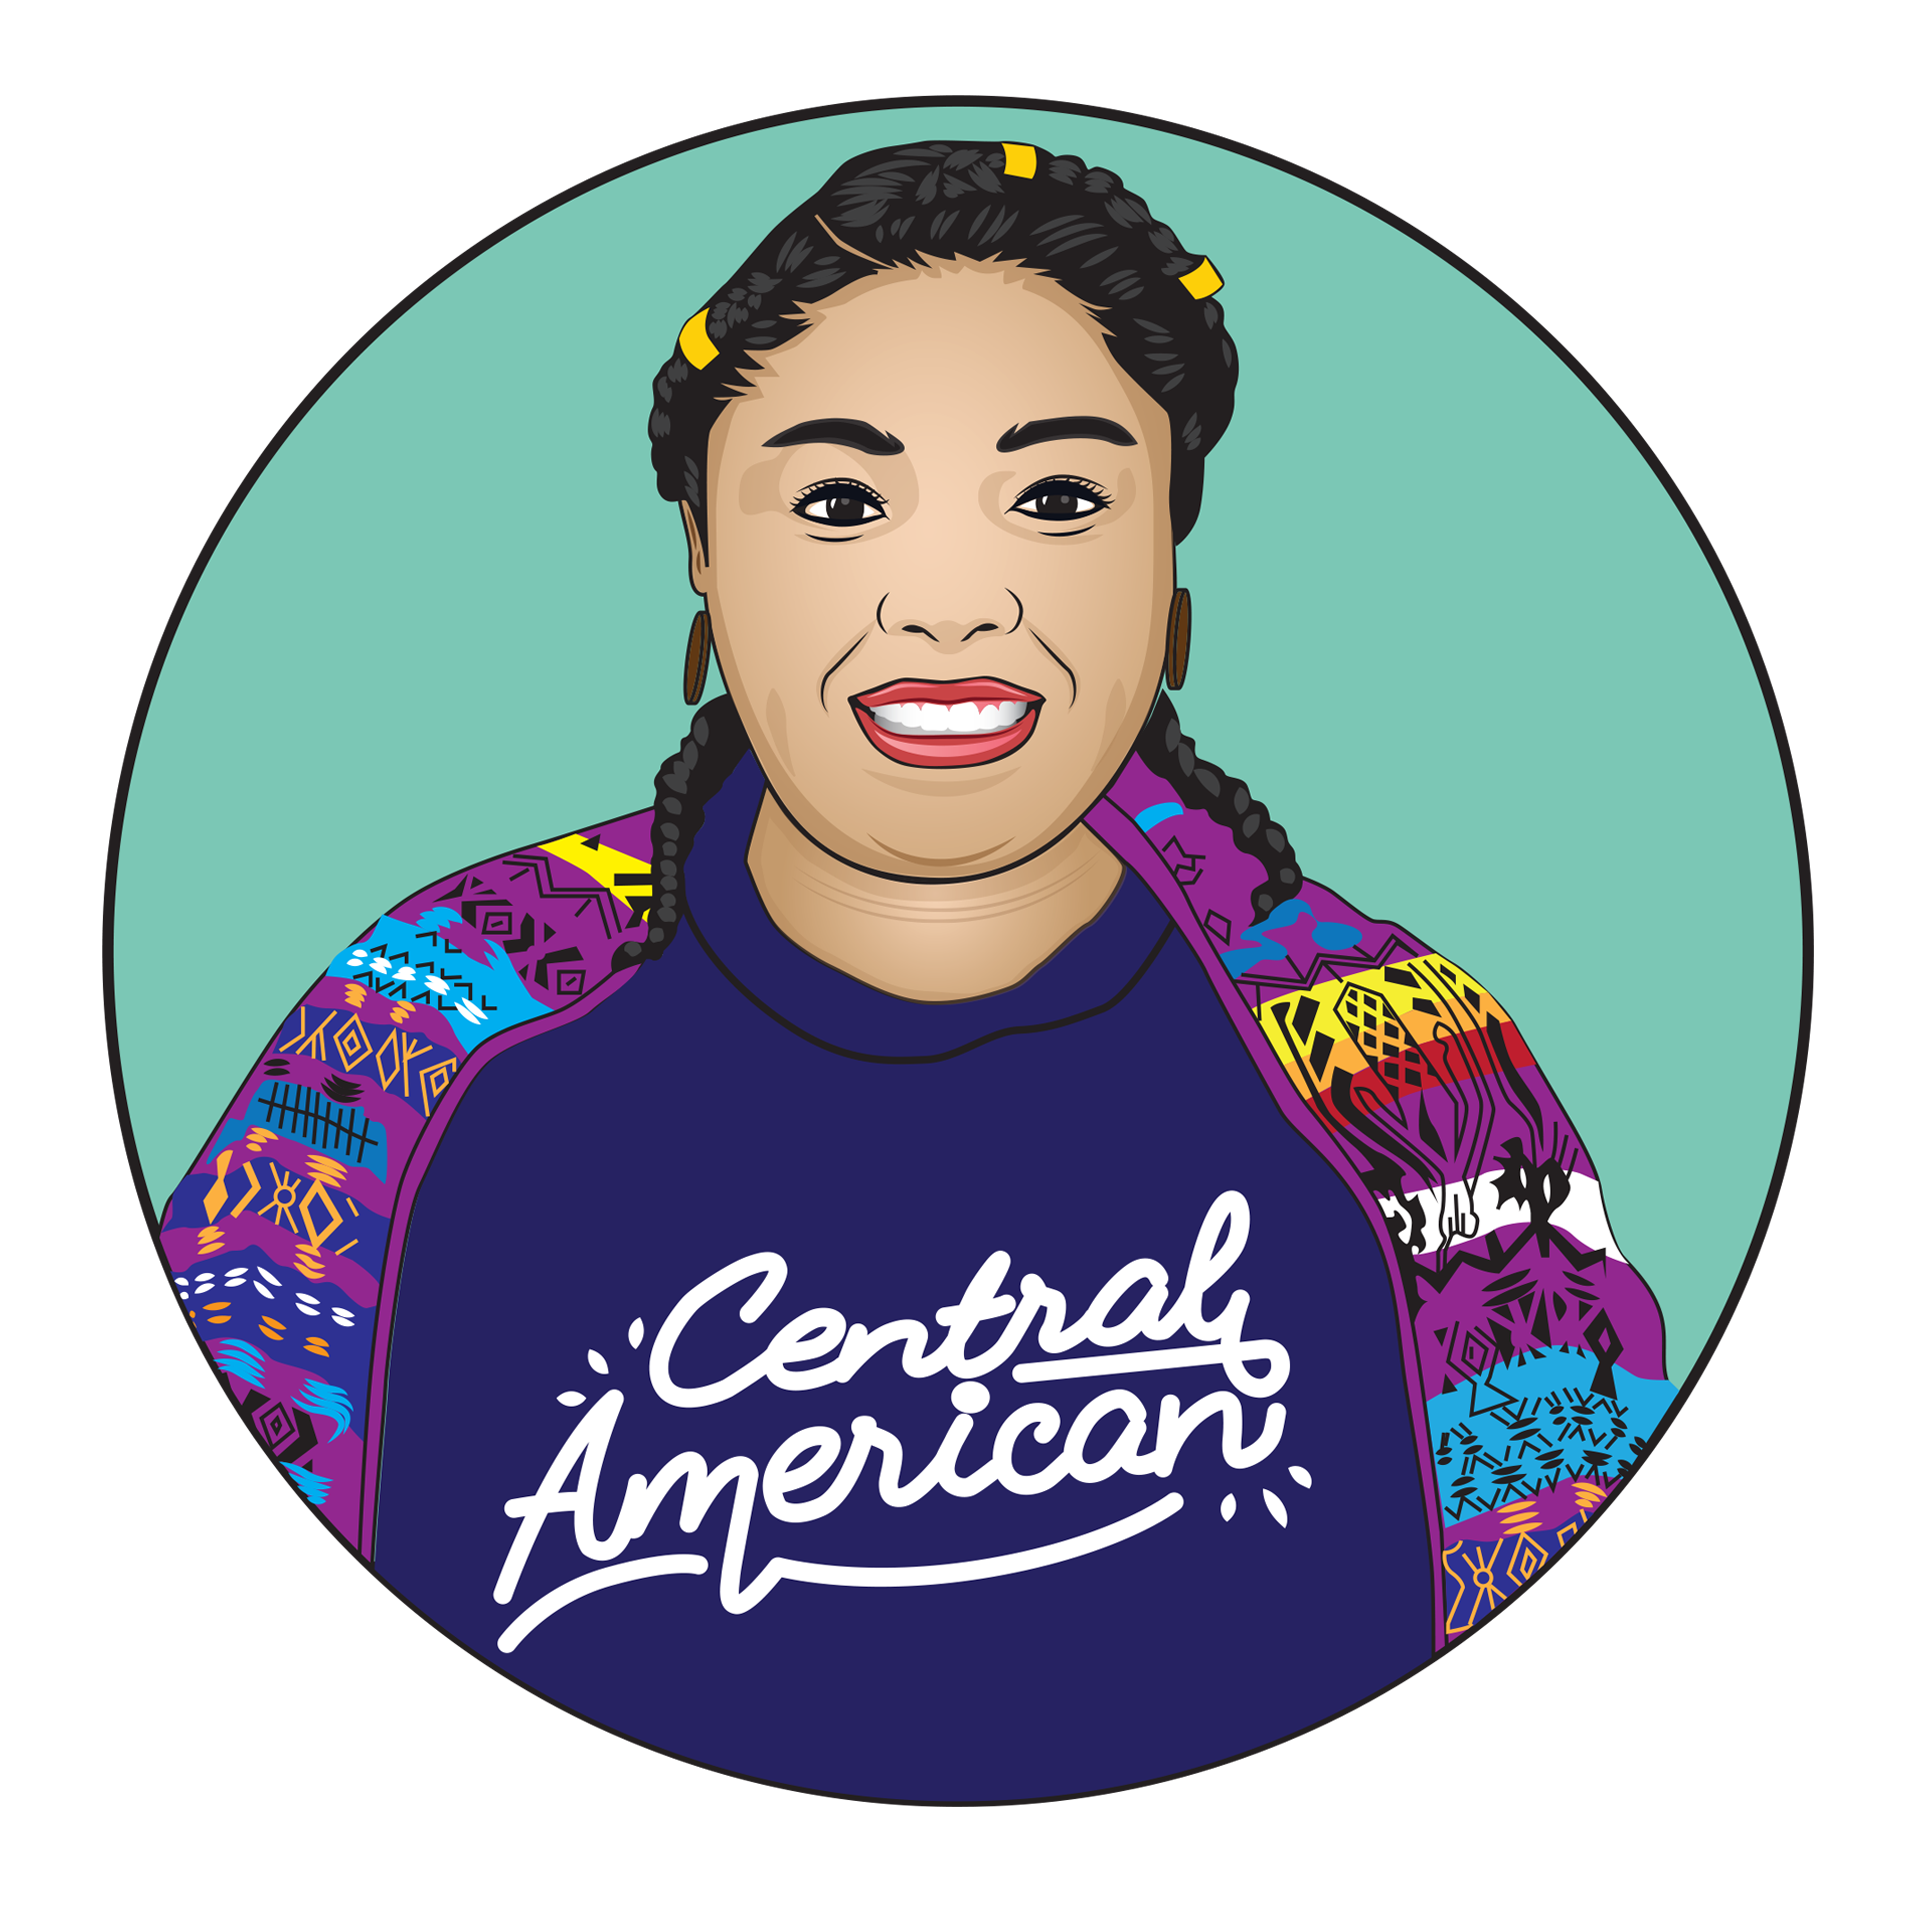 An illustrated image of Cynthia a lighter skinned woman with her hair in two braids around the crown of her head. She's wearing a jacket with intricate and colorful designs with a blue shirt that reads "Central American." Her image is on a teal background.